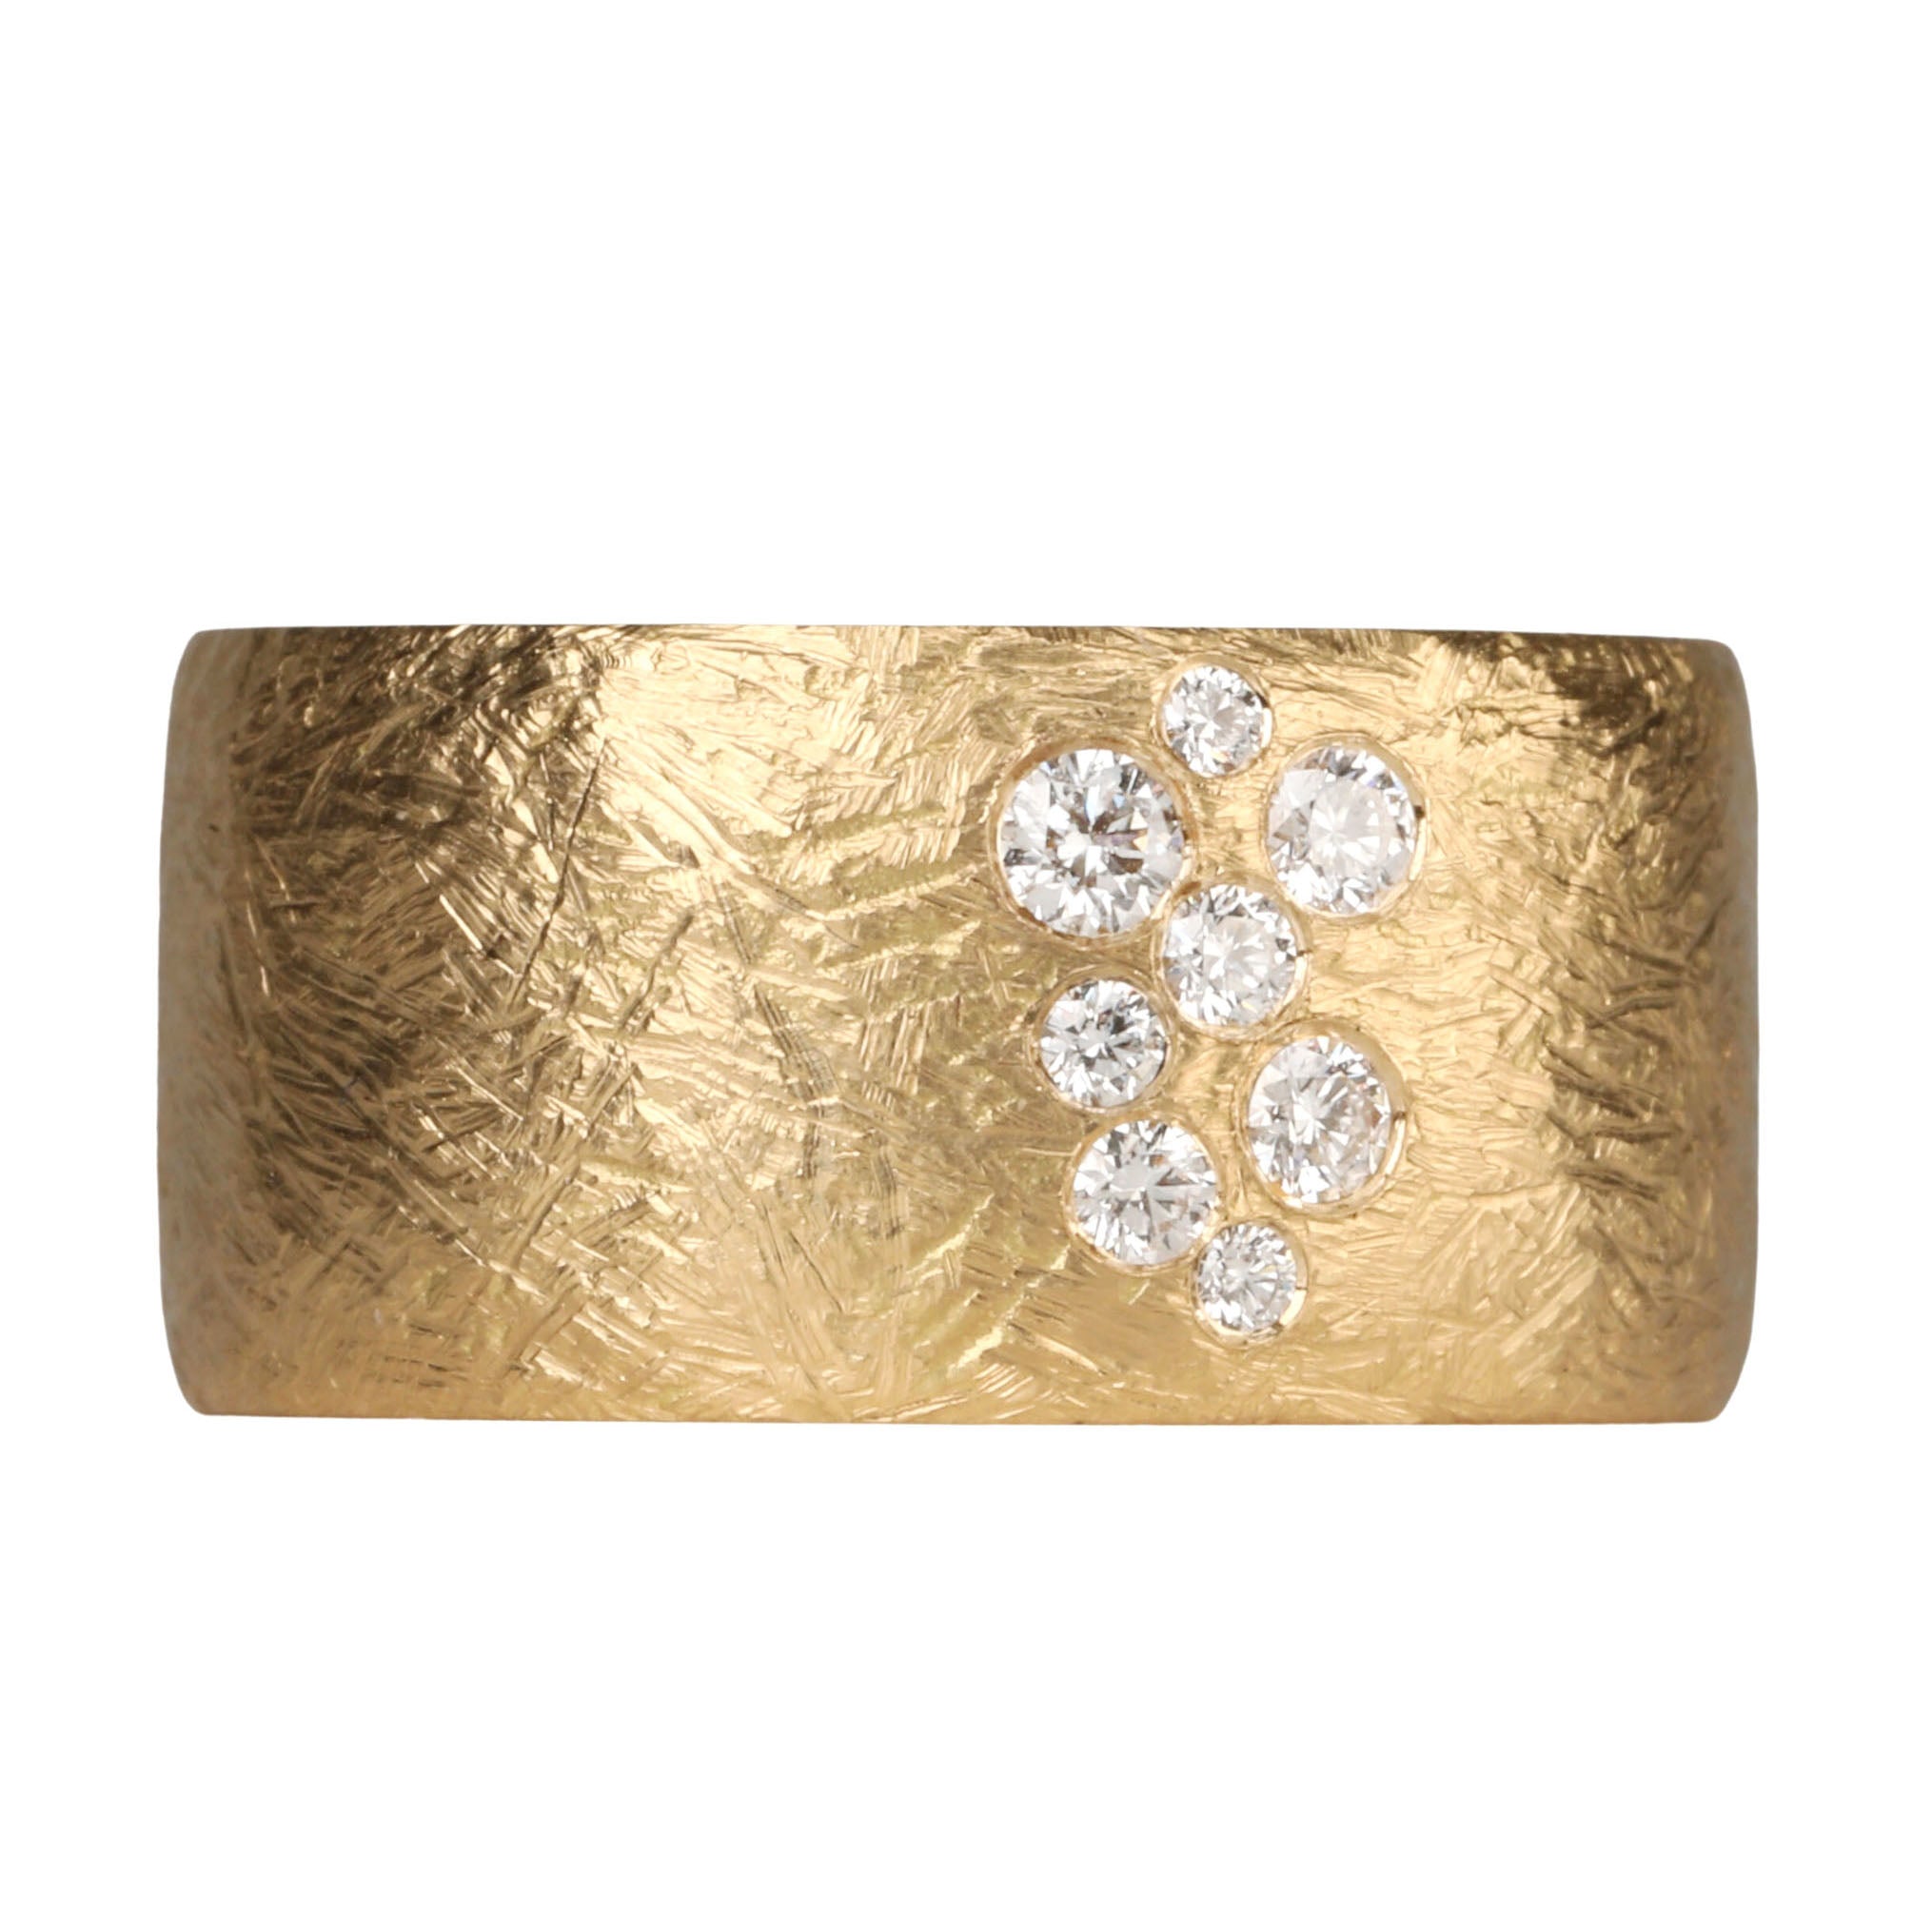 18K Gold Cigar Band with Diamond Inlay &quot;Constellation&quot; Motif - Peridot Fine Jewelry - Anne Sportun